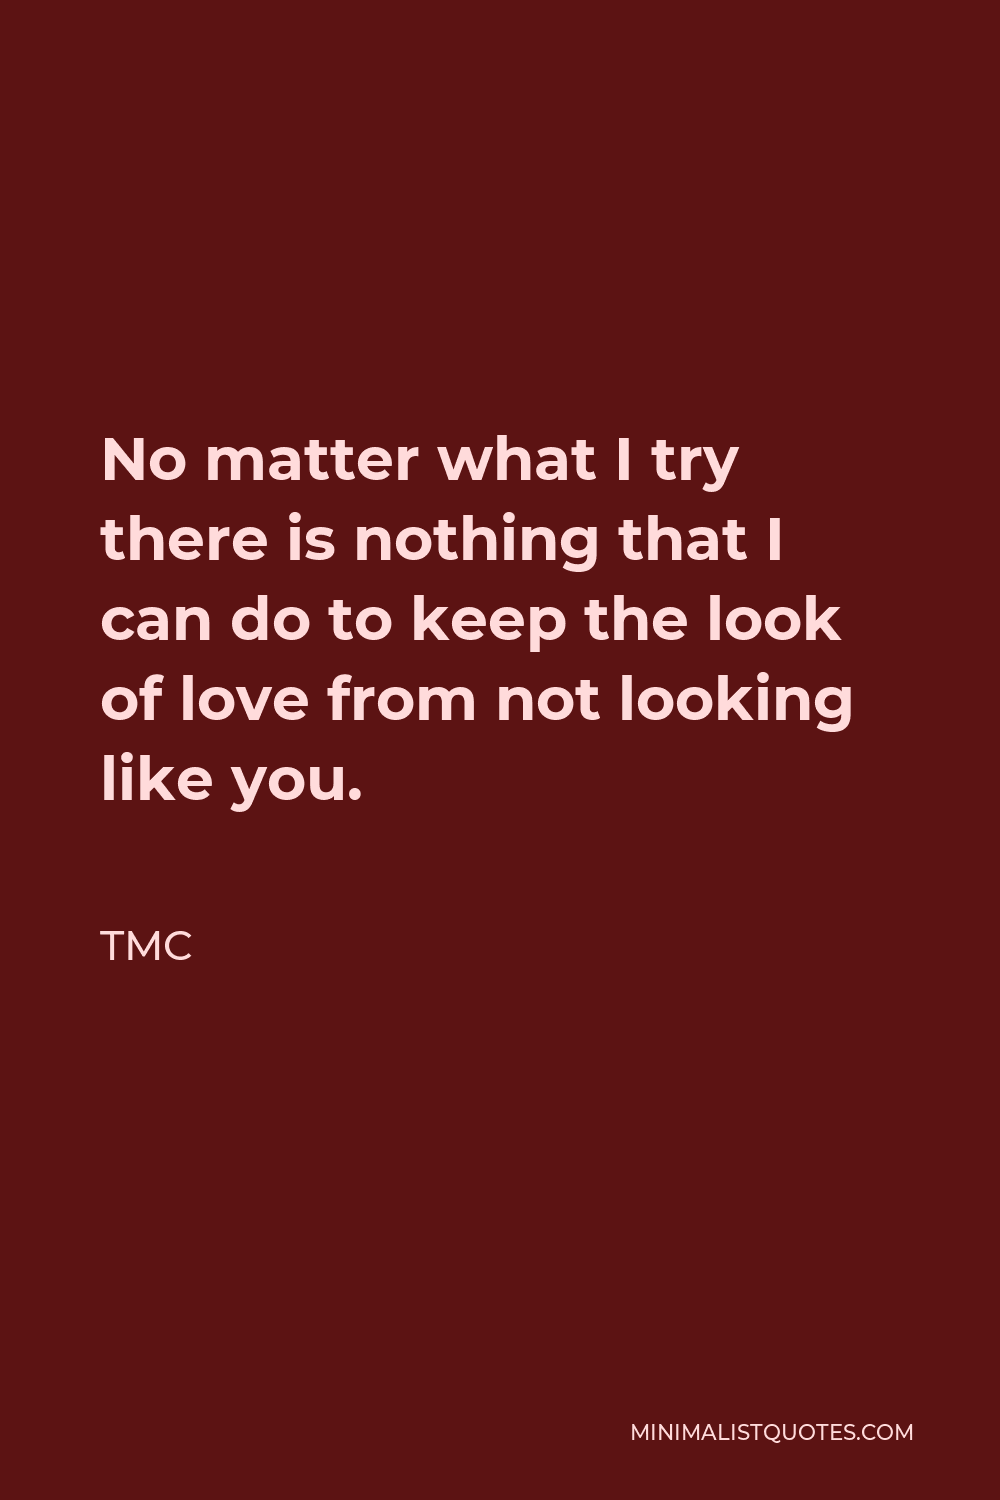 TMC Quote - No matter what I try there is nothing that I can do to keep the look of love from not looking like you.